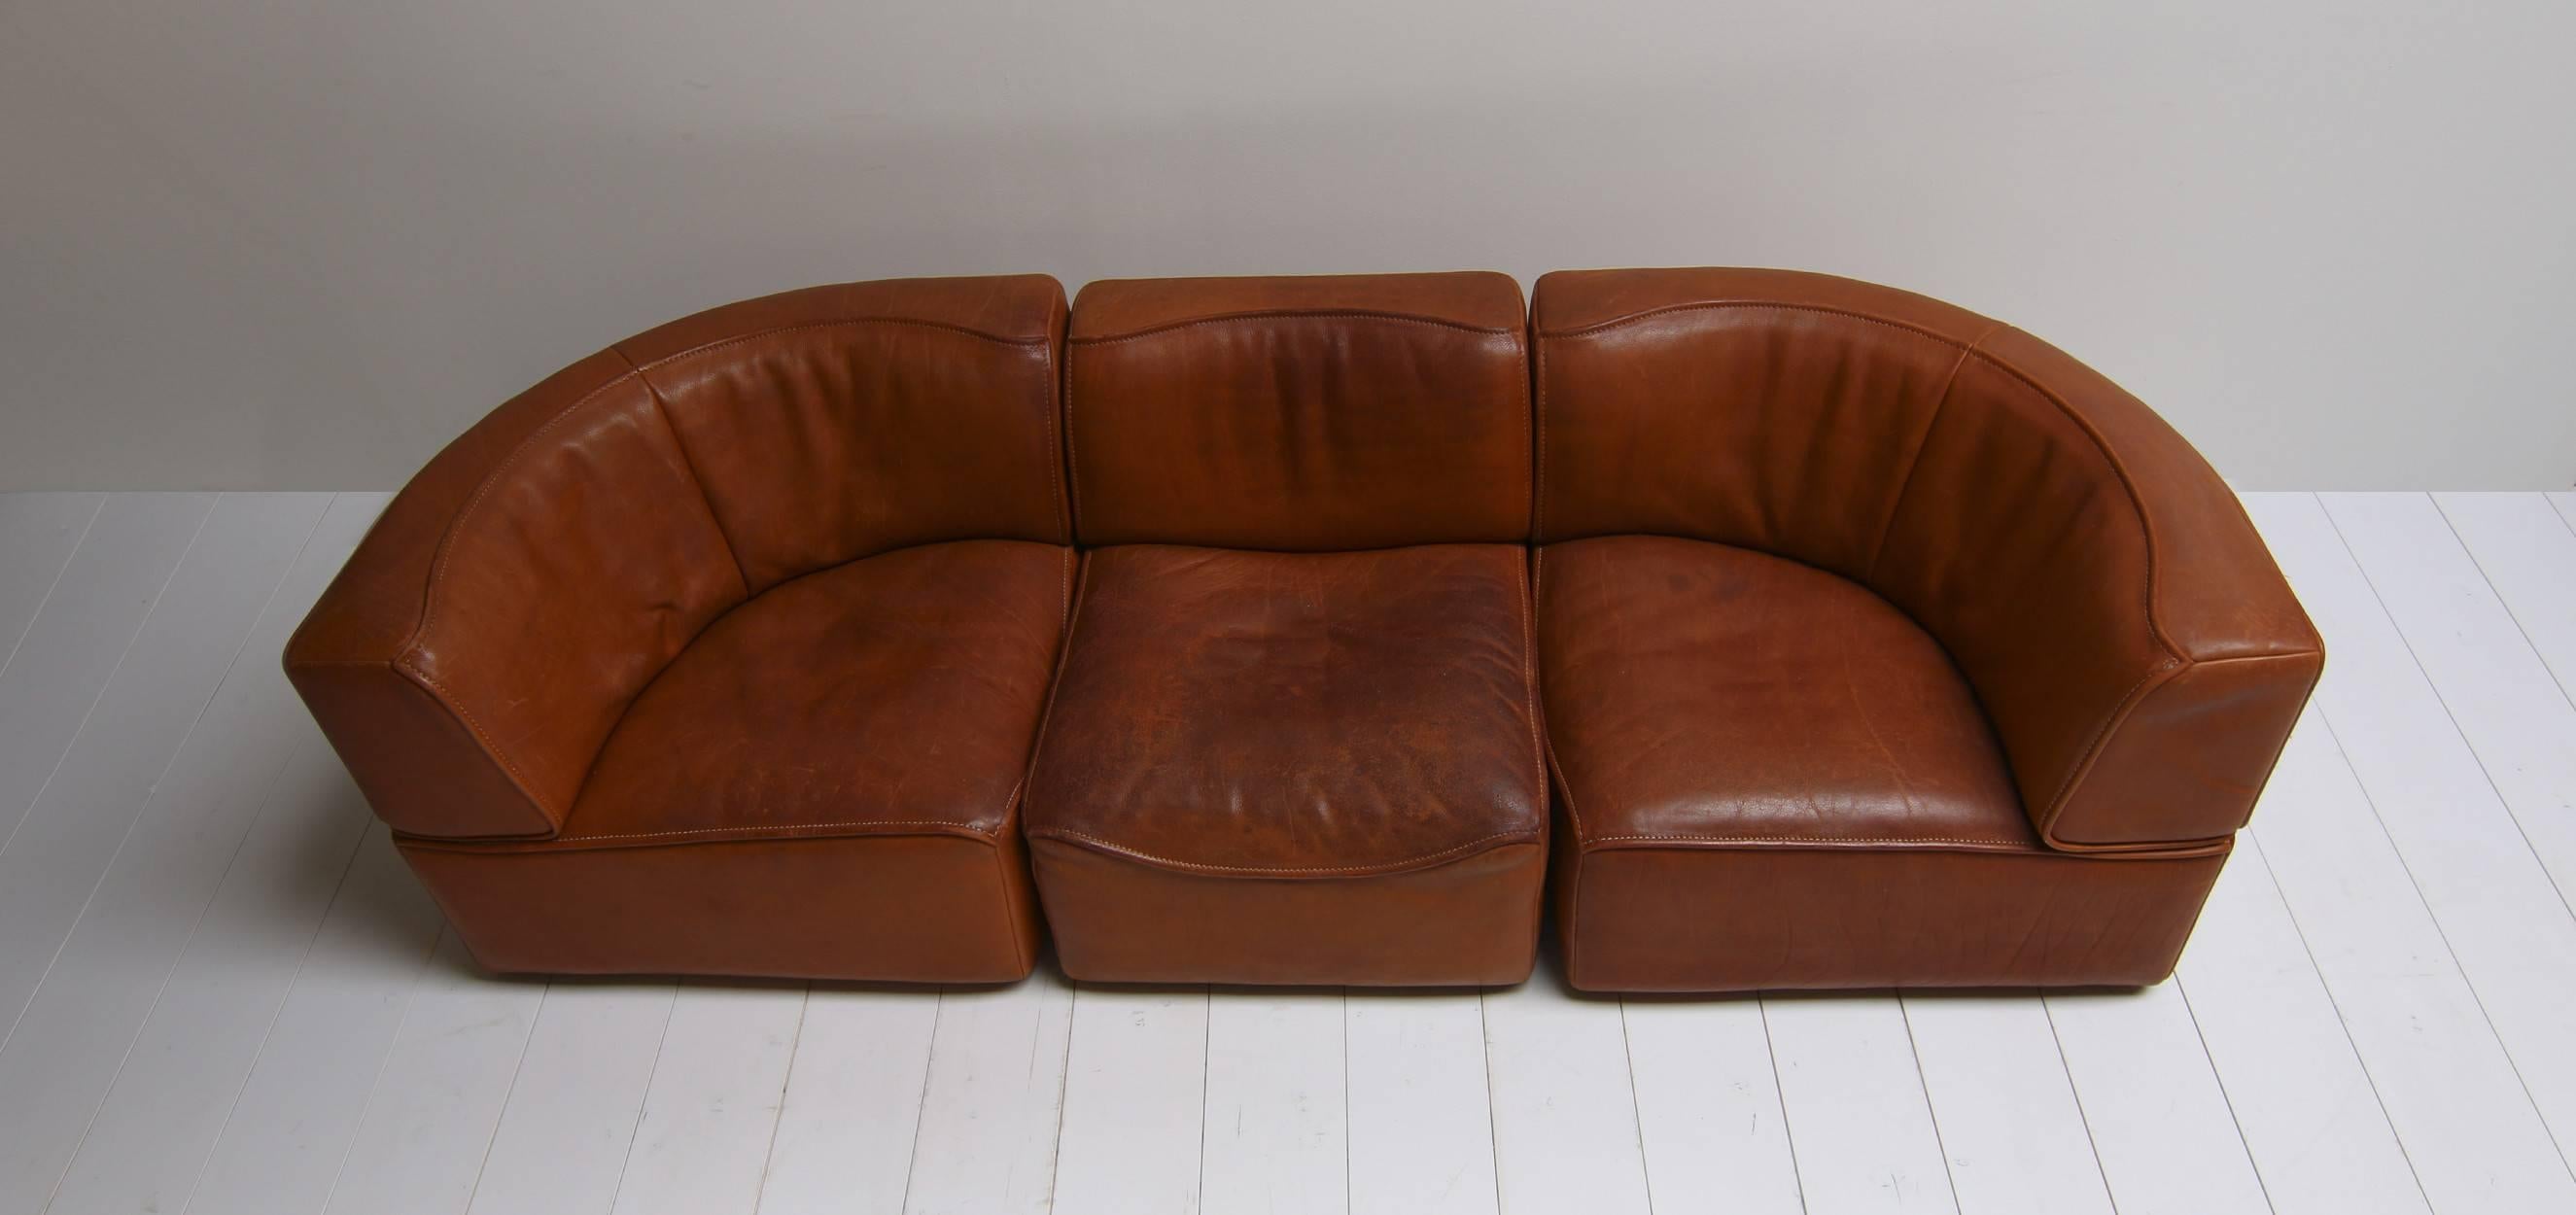 De Sede DS15 sofa designed in the 1970s. This sofa is made by the Swiss design brand De Sede. The set has three elements consisting of two corner elements and a straight element. The three parts fit together very well which makes this sofa a